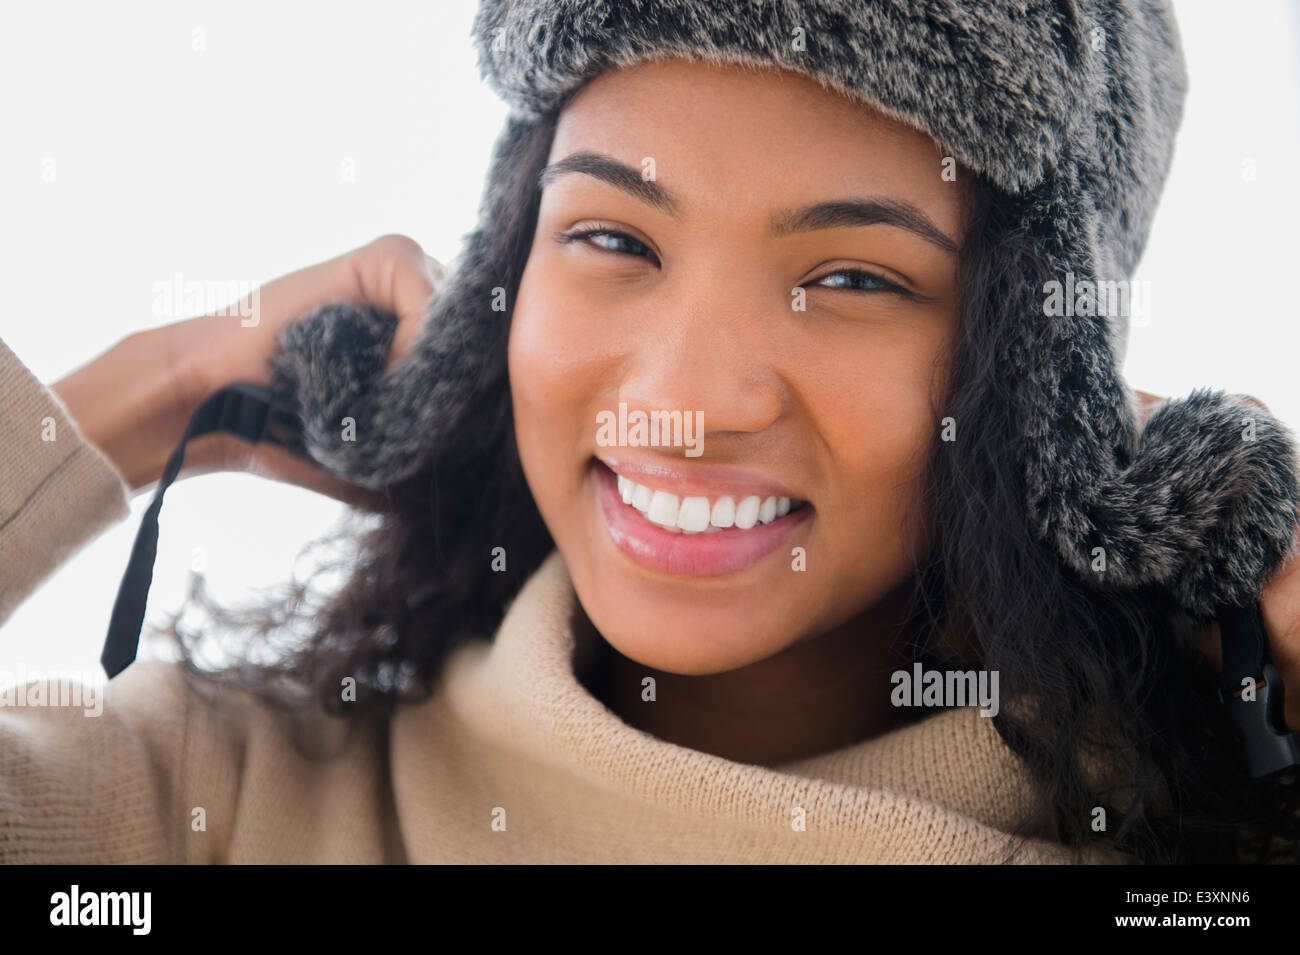 Mixed race woman wearing furry hat in snow Stock Photo